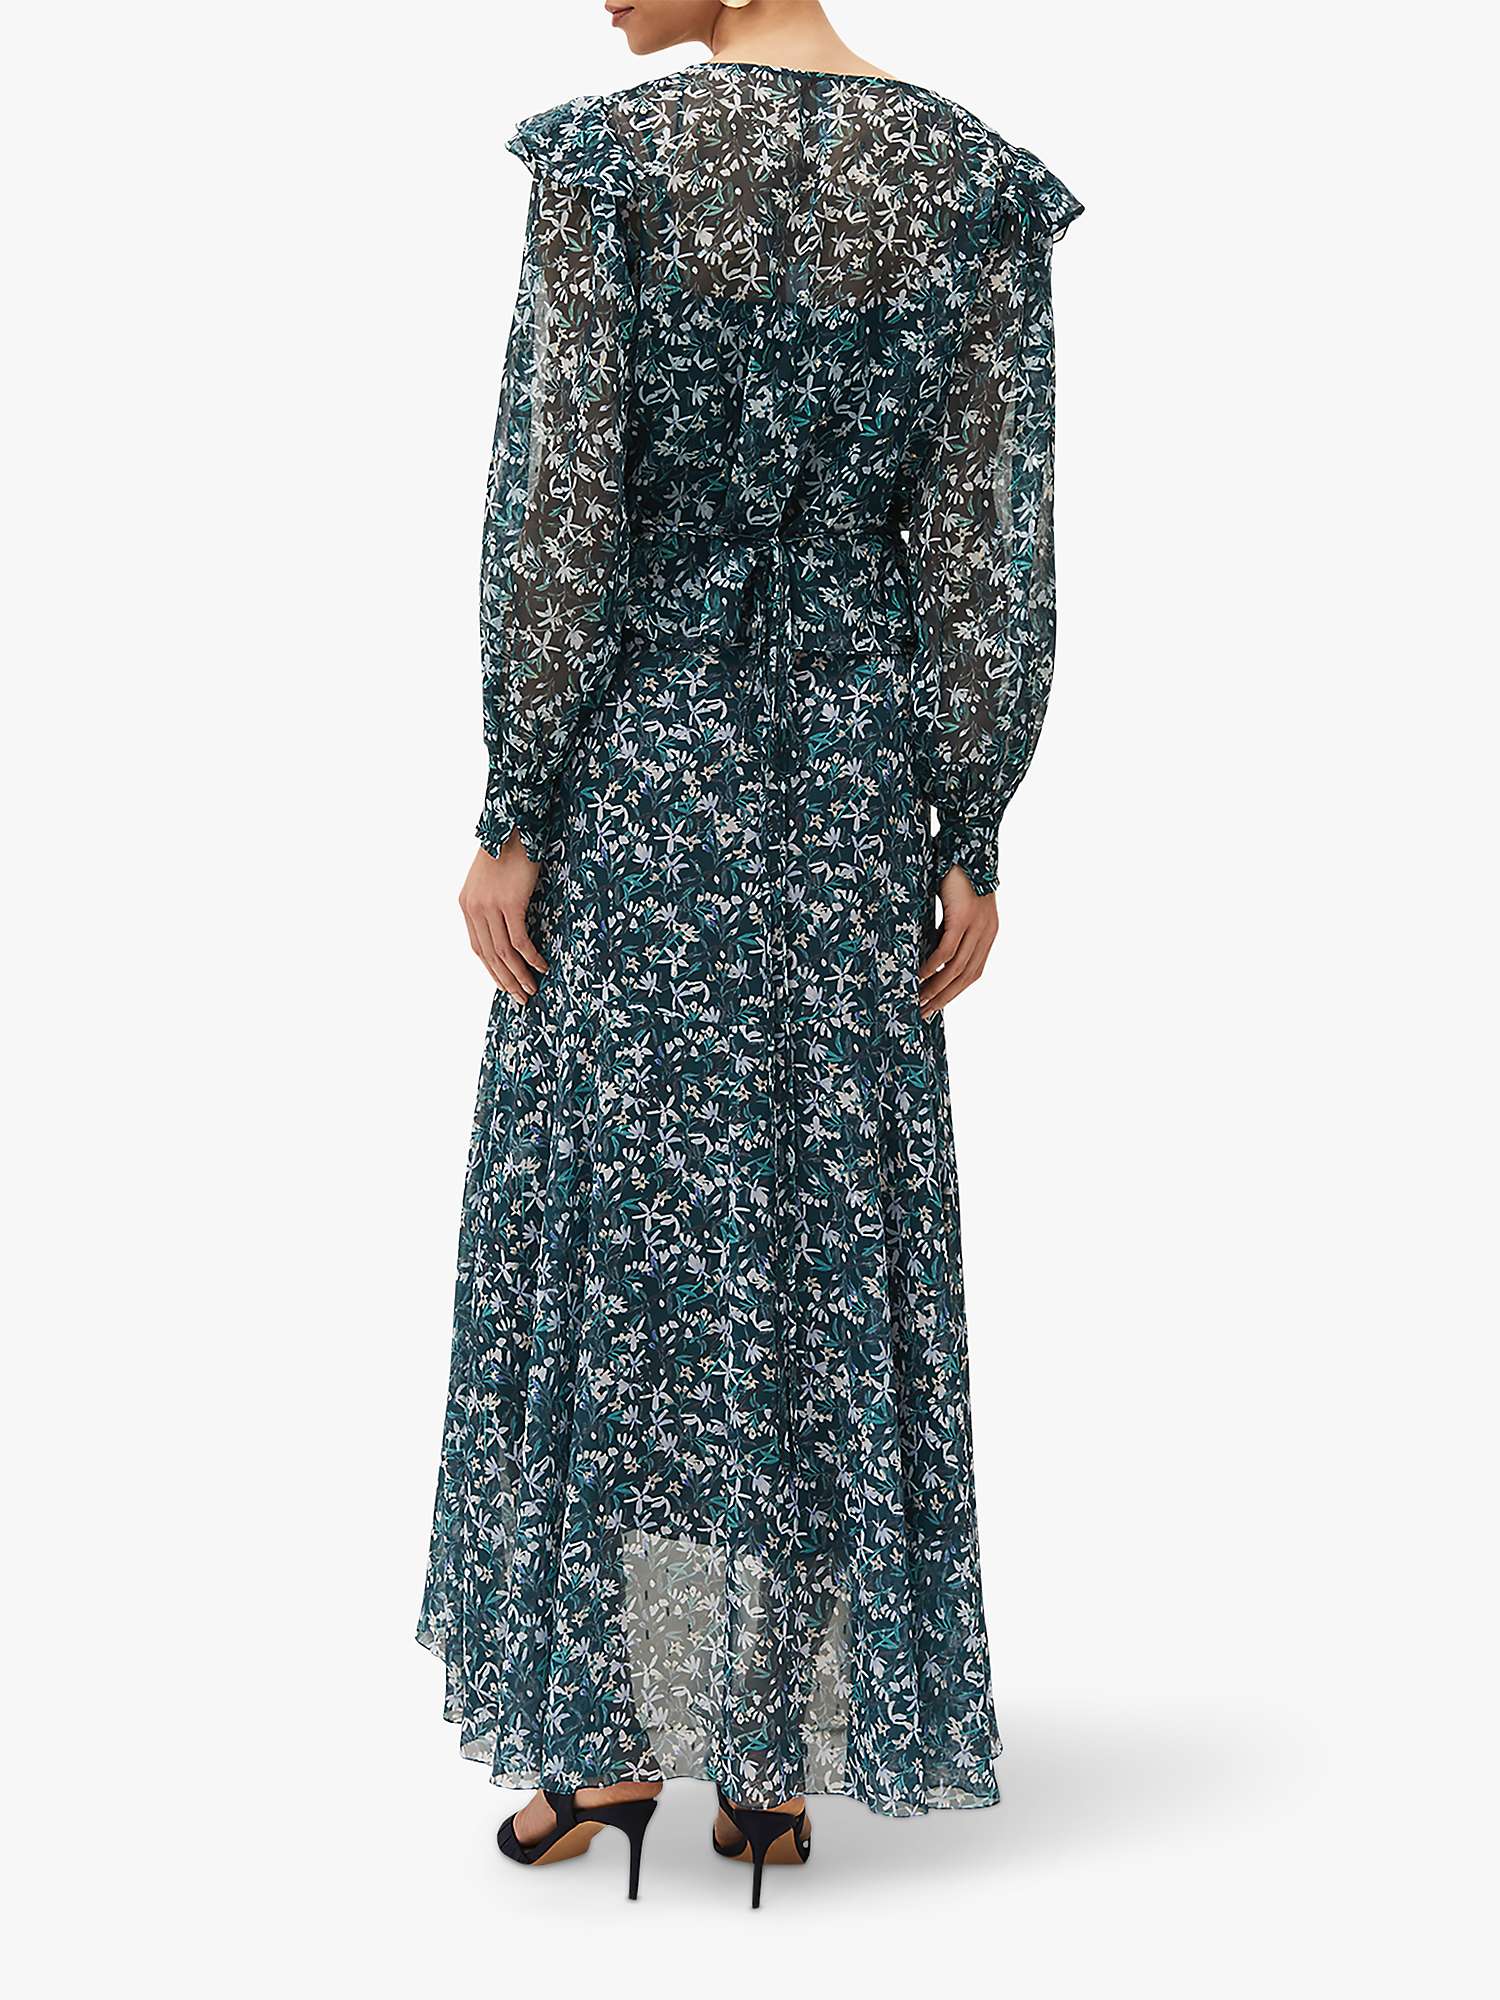 Buy Phase Eight Lola Floral Dipped Hem Maxi Skirt, Petrol Online at johnlewis.com